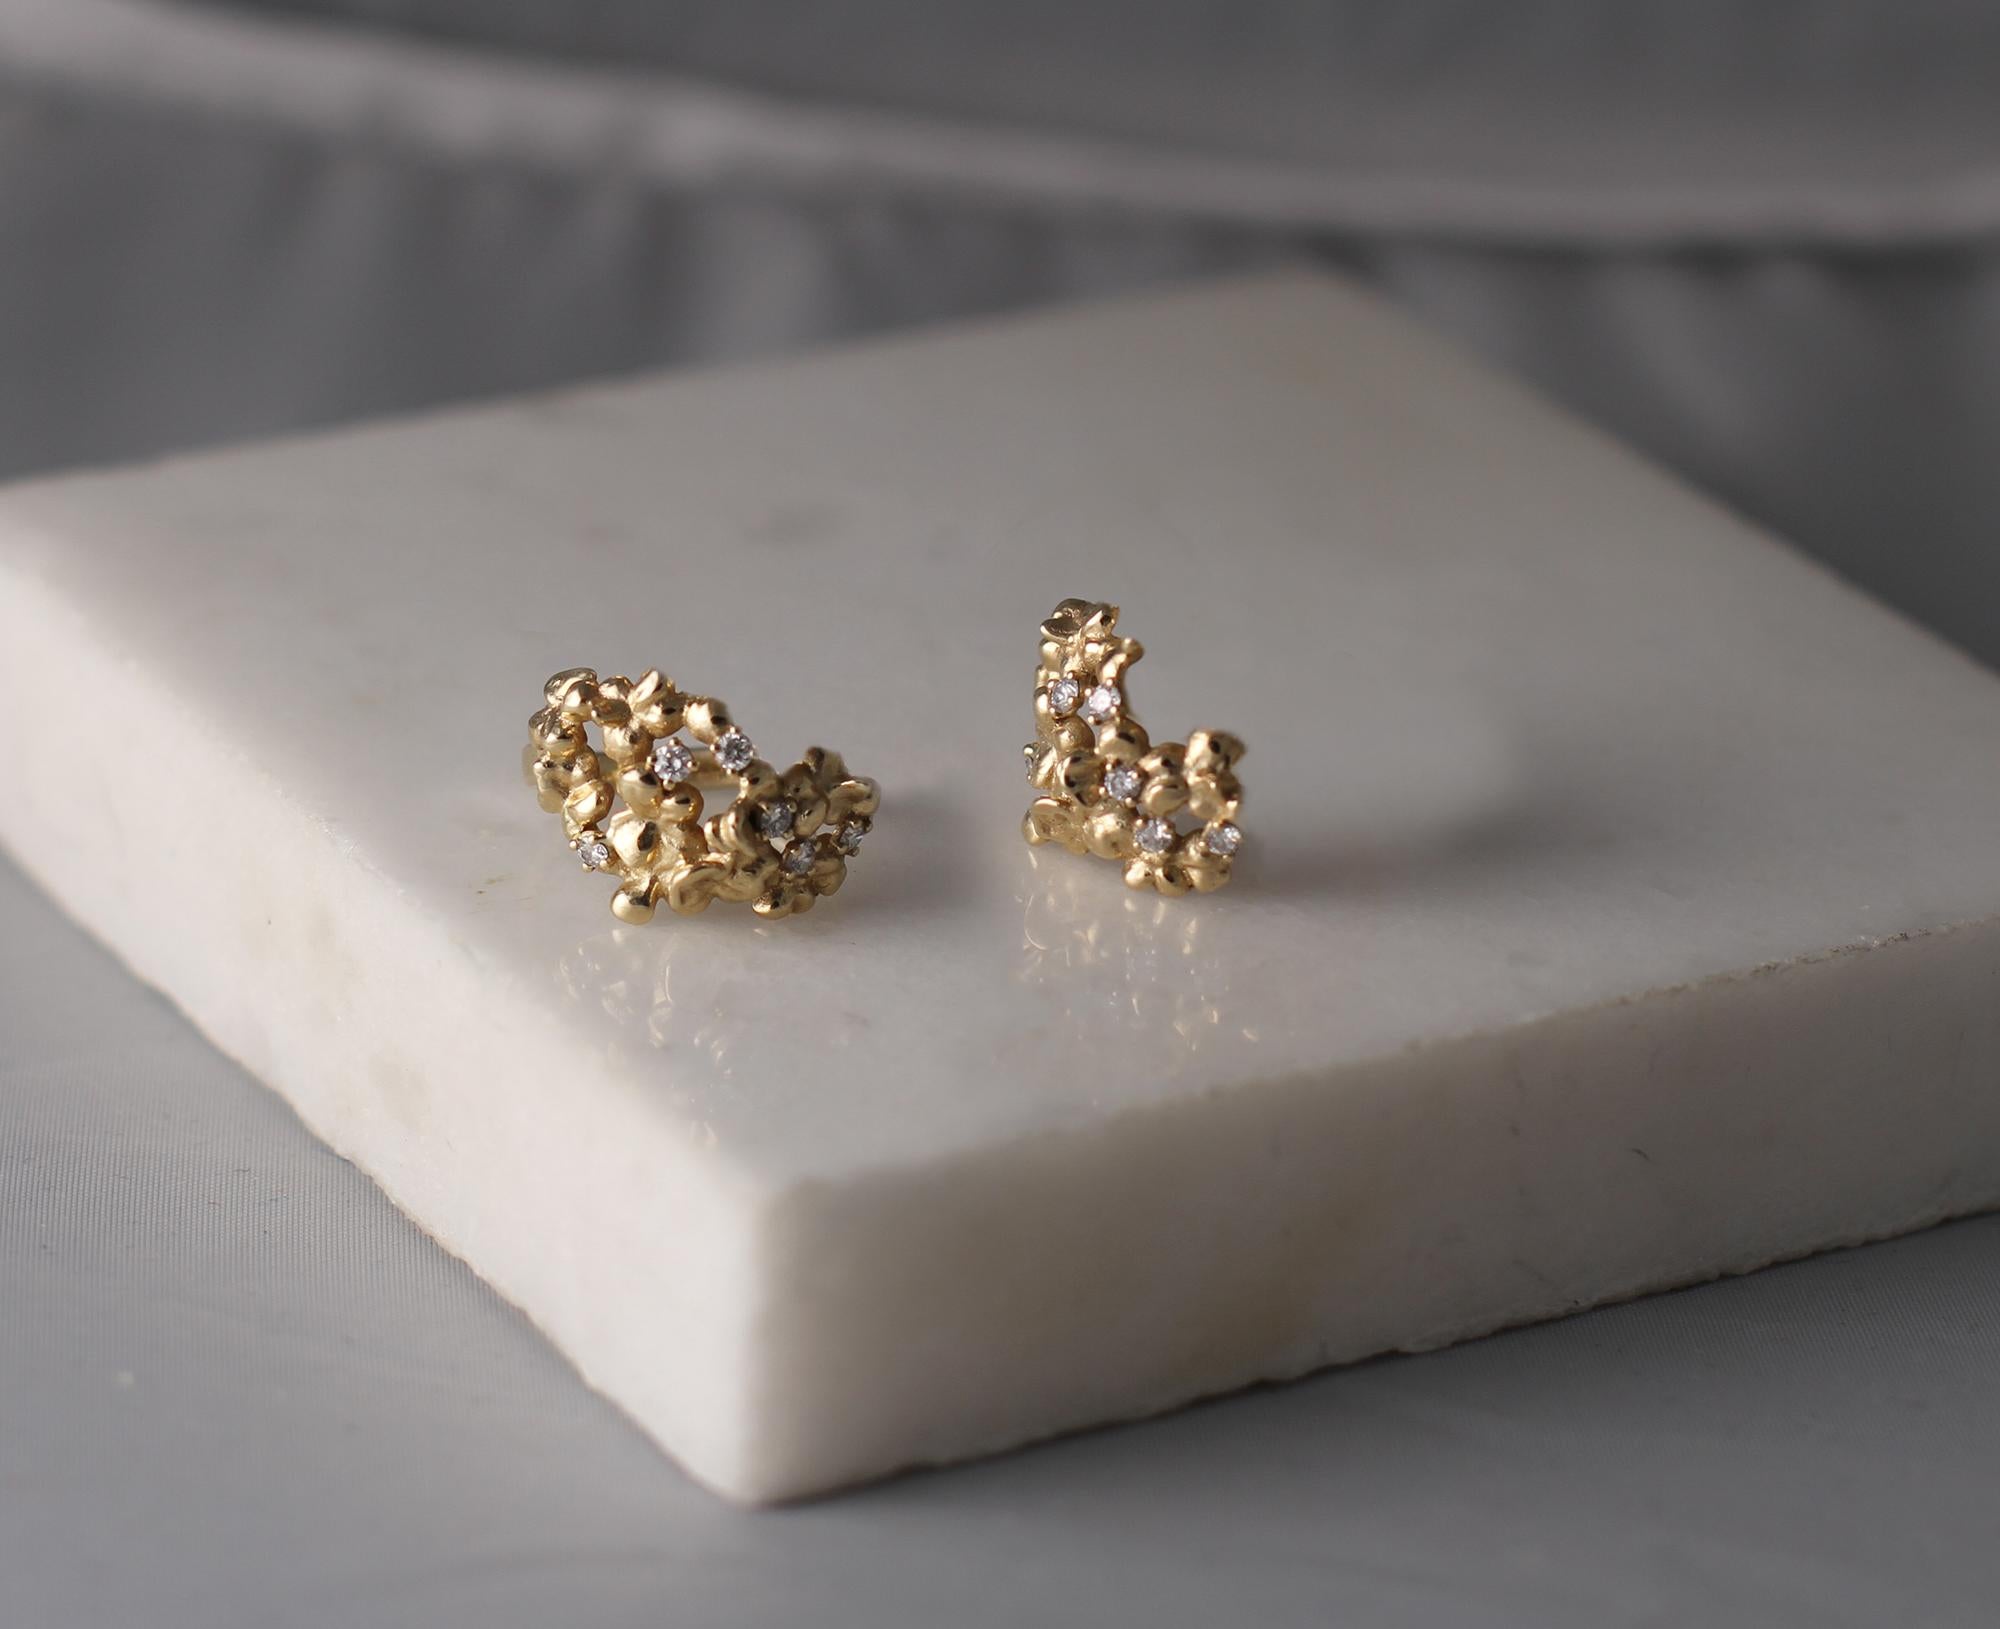 This contemporary Hortensia clip-on earrings are in 18 karat rose gold with round natural diamonds, VS, F-G. The sculptural design adds the extra highlights to the surface of the gold. The diamonds add the delicate blinks. This jewellery collection